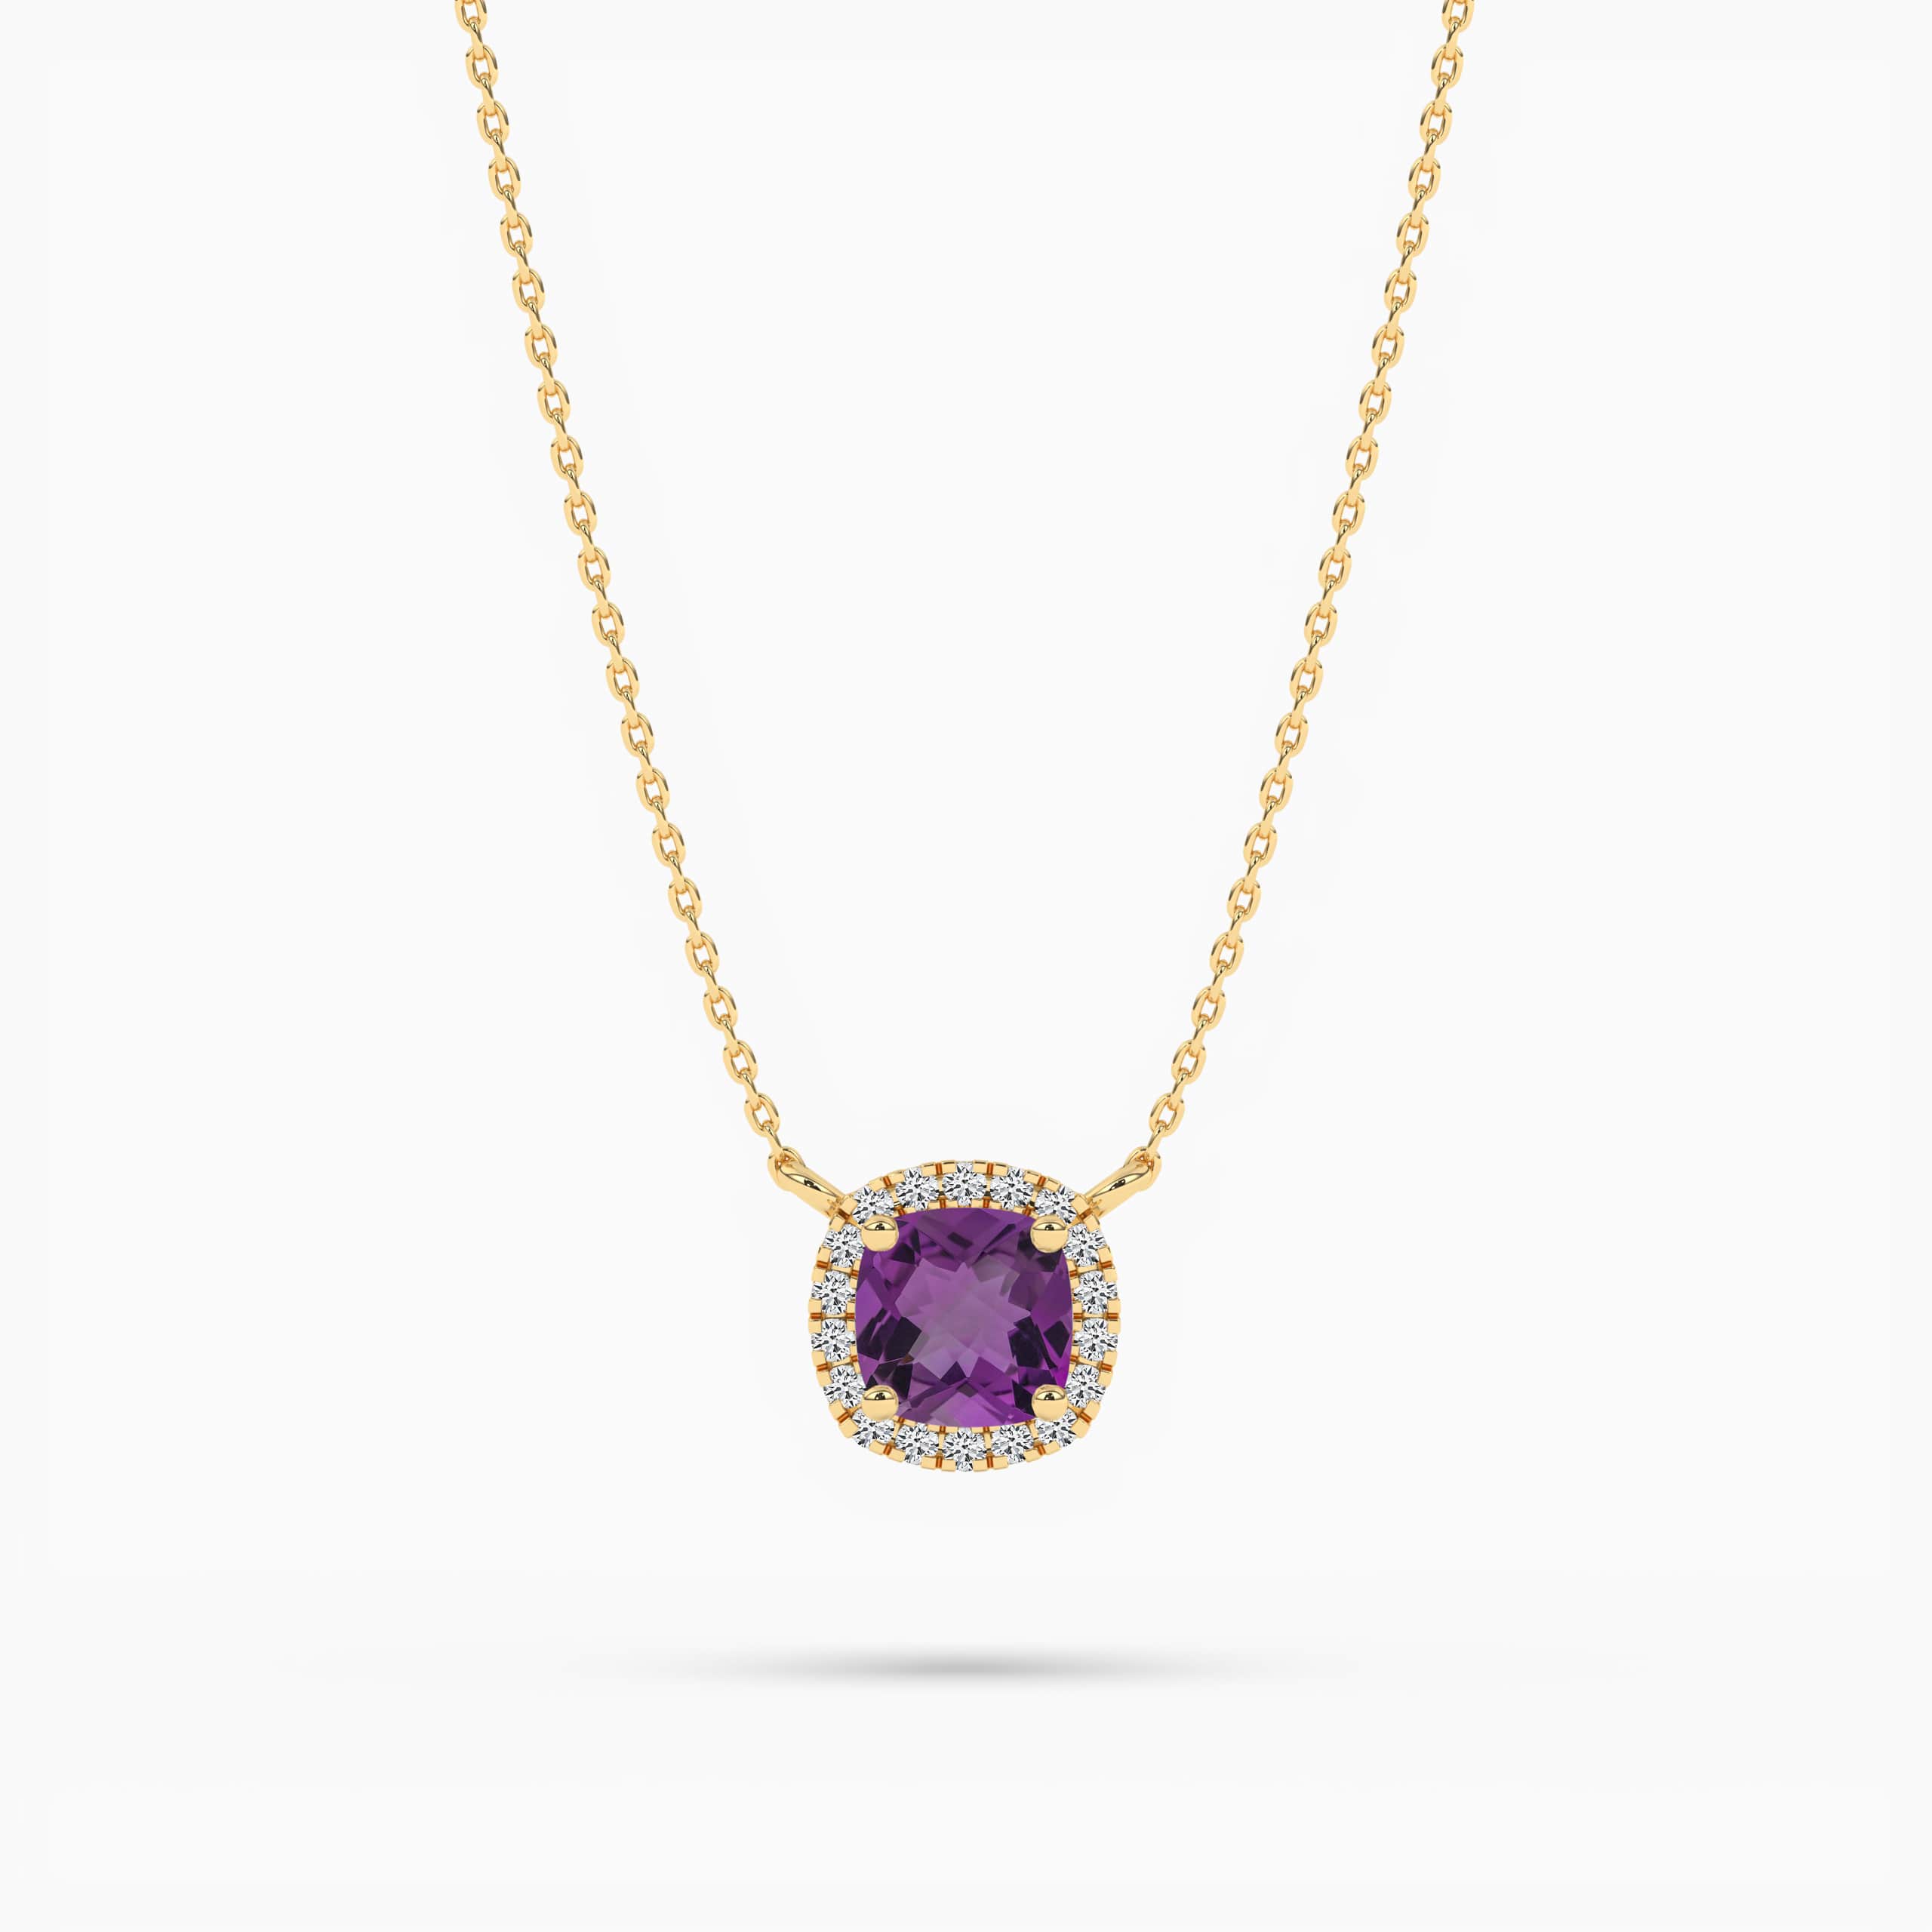 Amethyst Necklace Gold Diamond Halo Necklace Cushion Cut Gemstone Handmade Necklace For Her